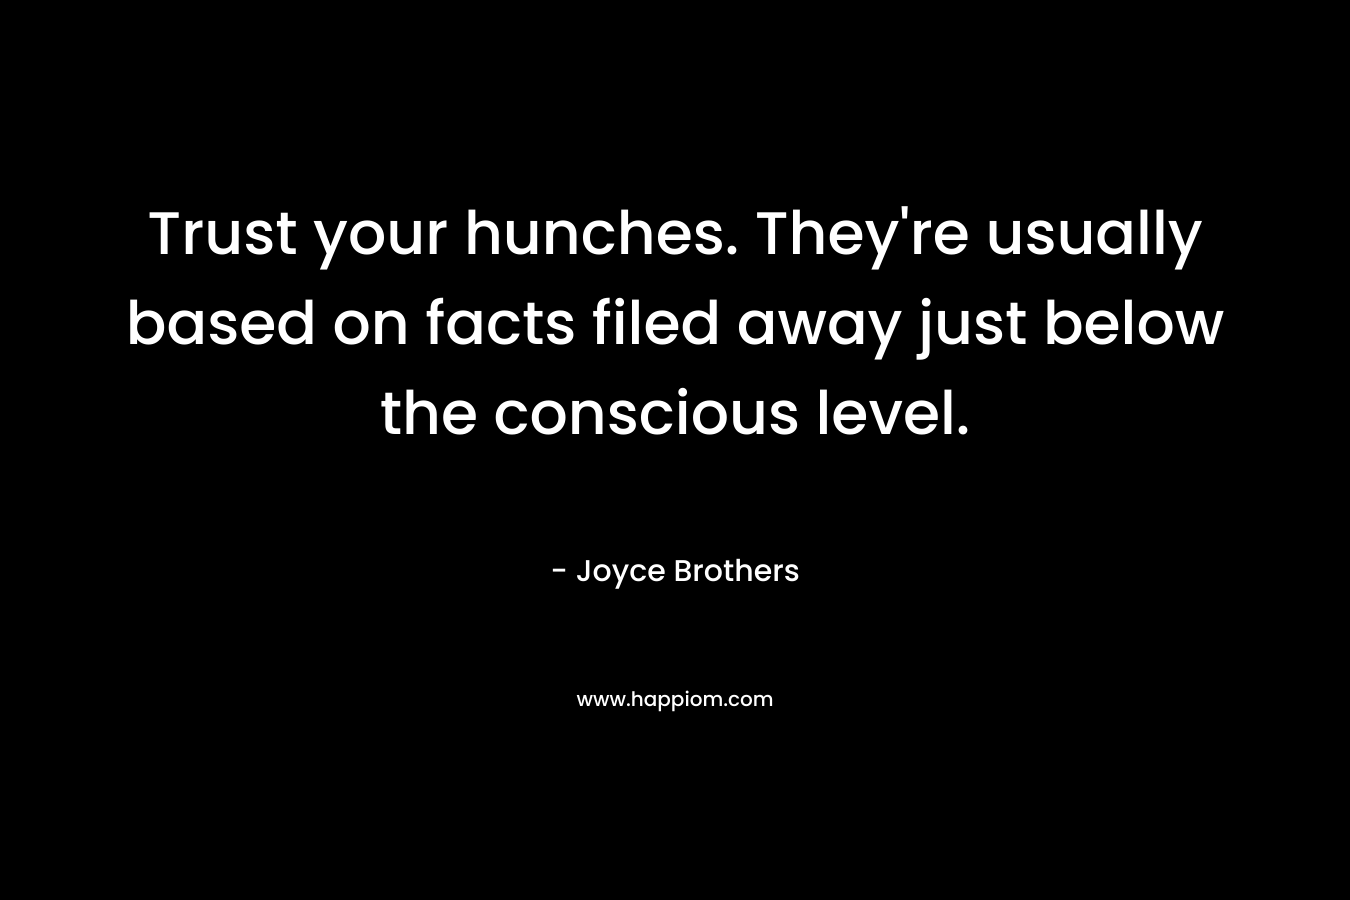 Trust your hunches. They’re usually based on facts filed away just below the conscious level. – Joyce Brothers